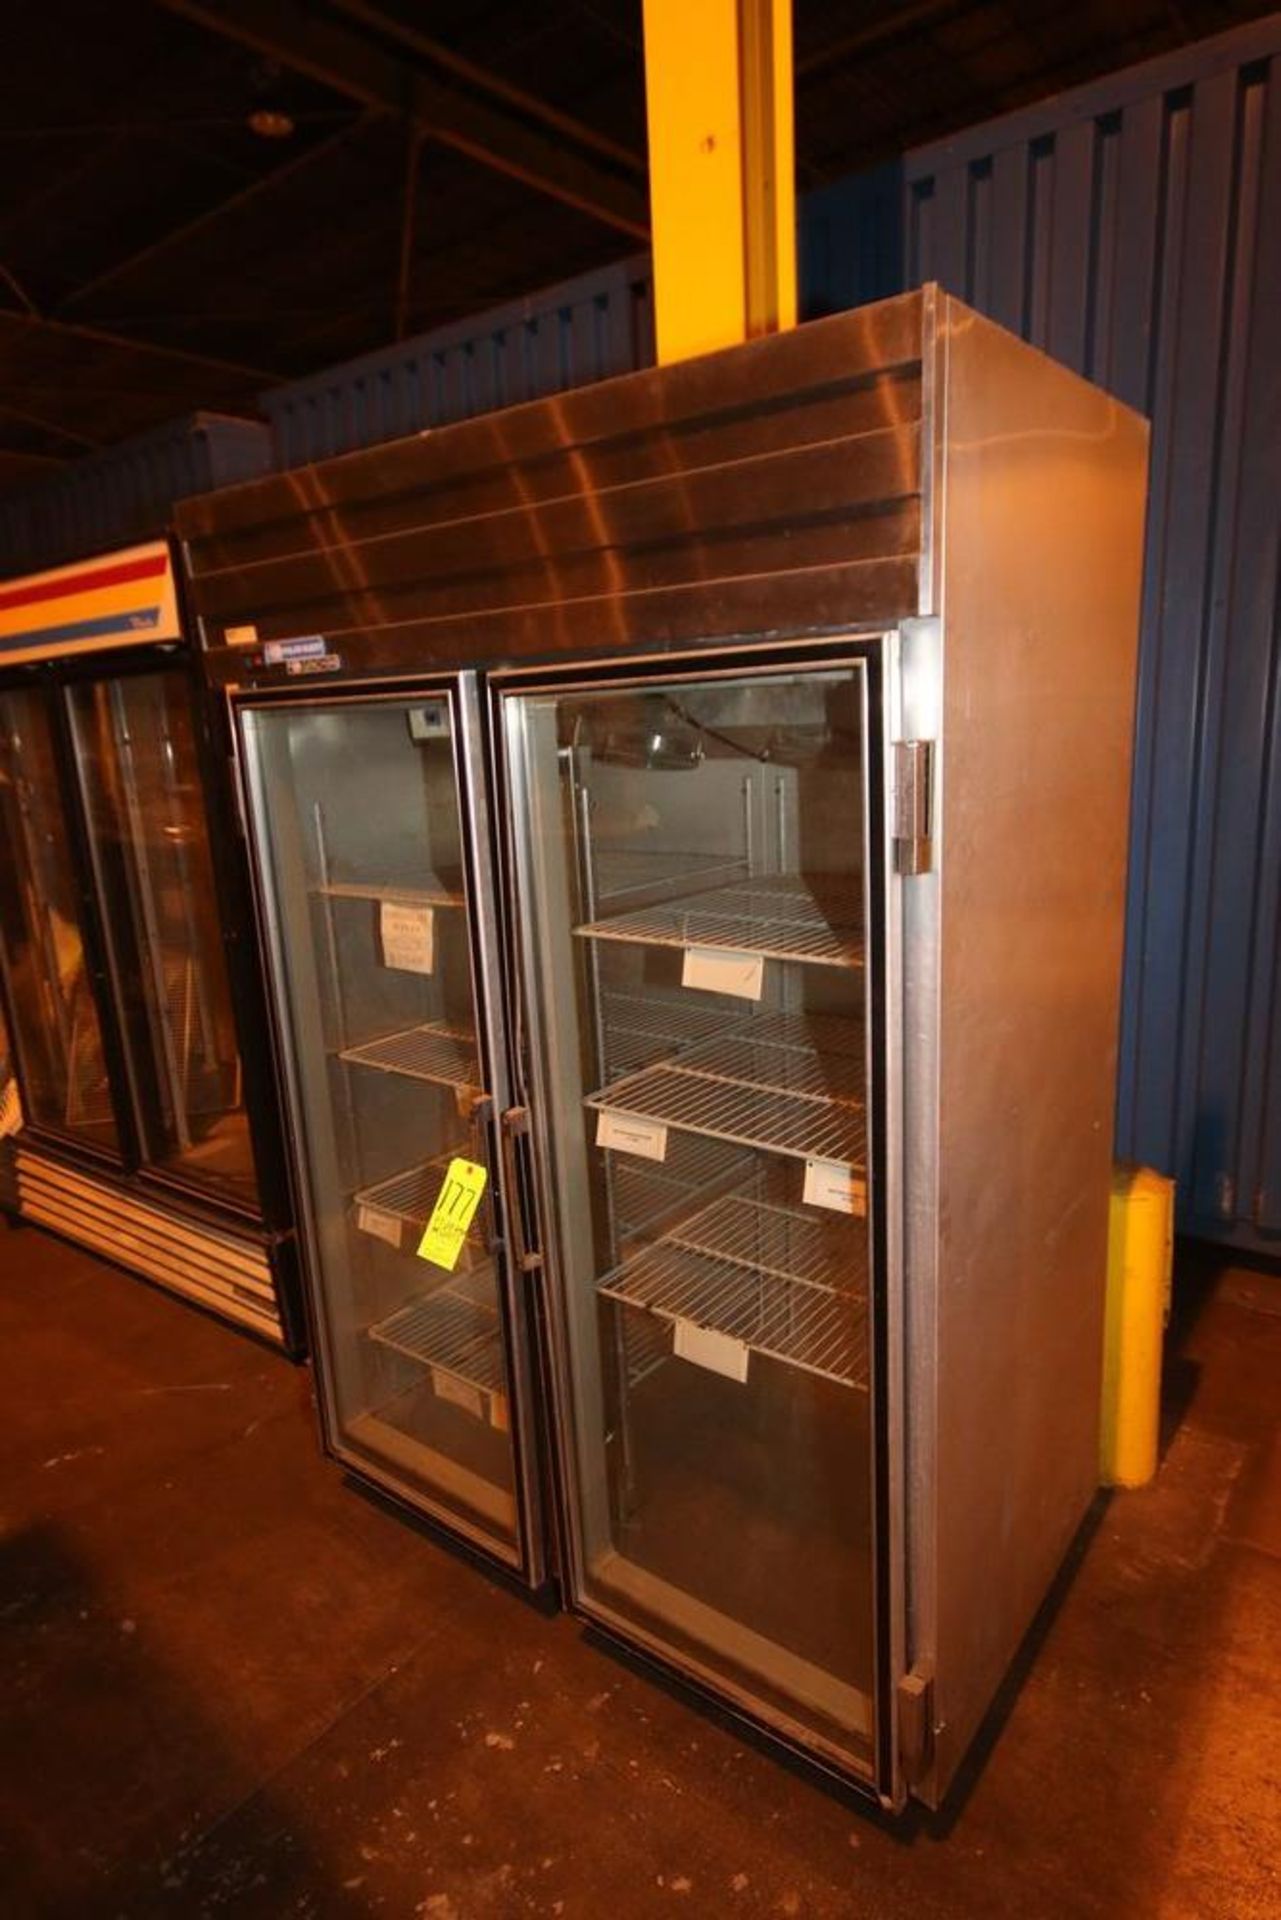 Polar Quest 2-Door Glass Refrigerator (LOCATED IN BROCKPORT, NY) (NOTE: SUBJECT TO CONFIRMATION)